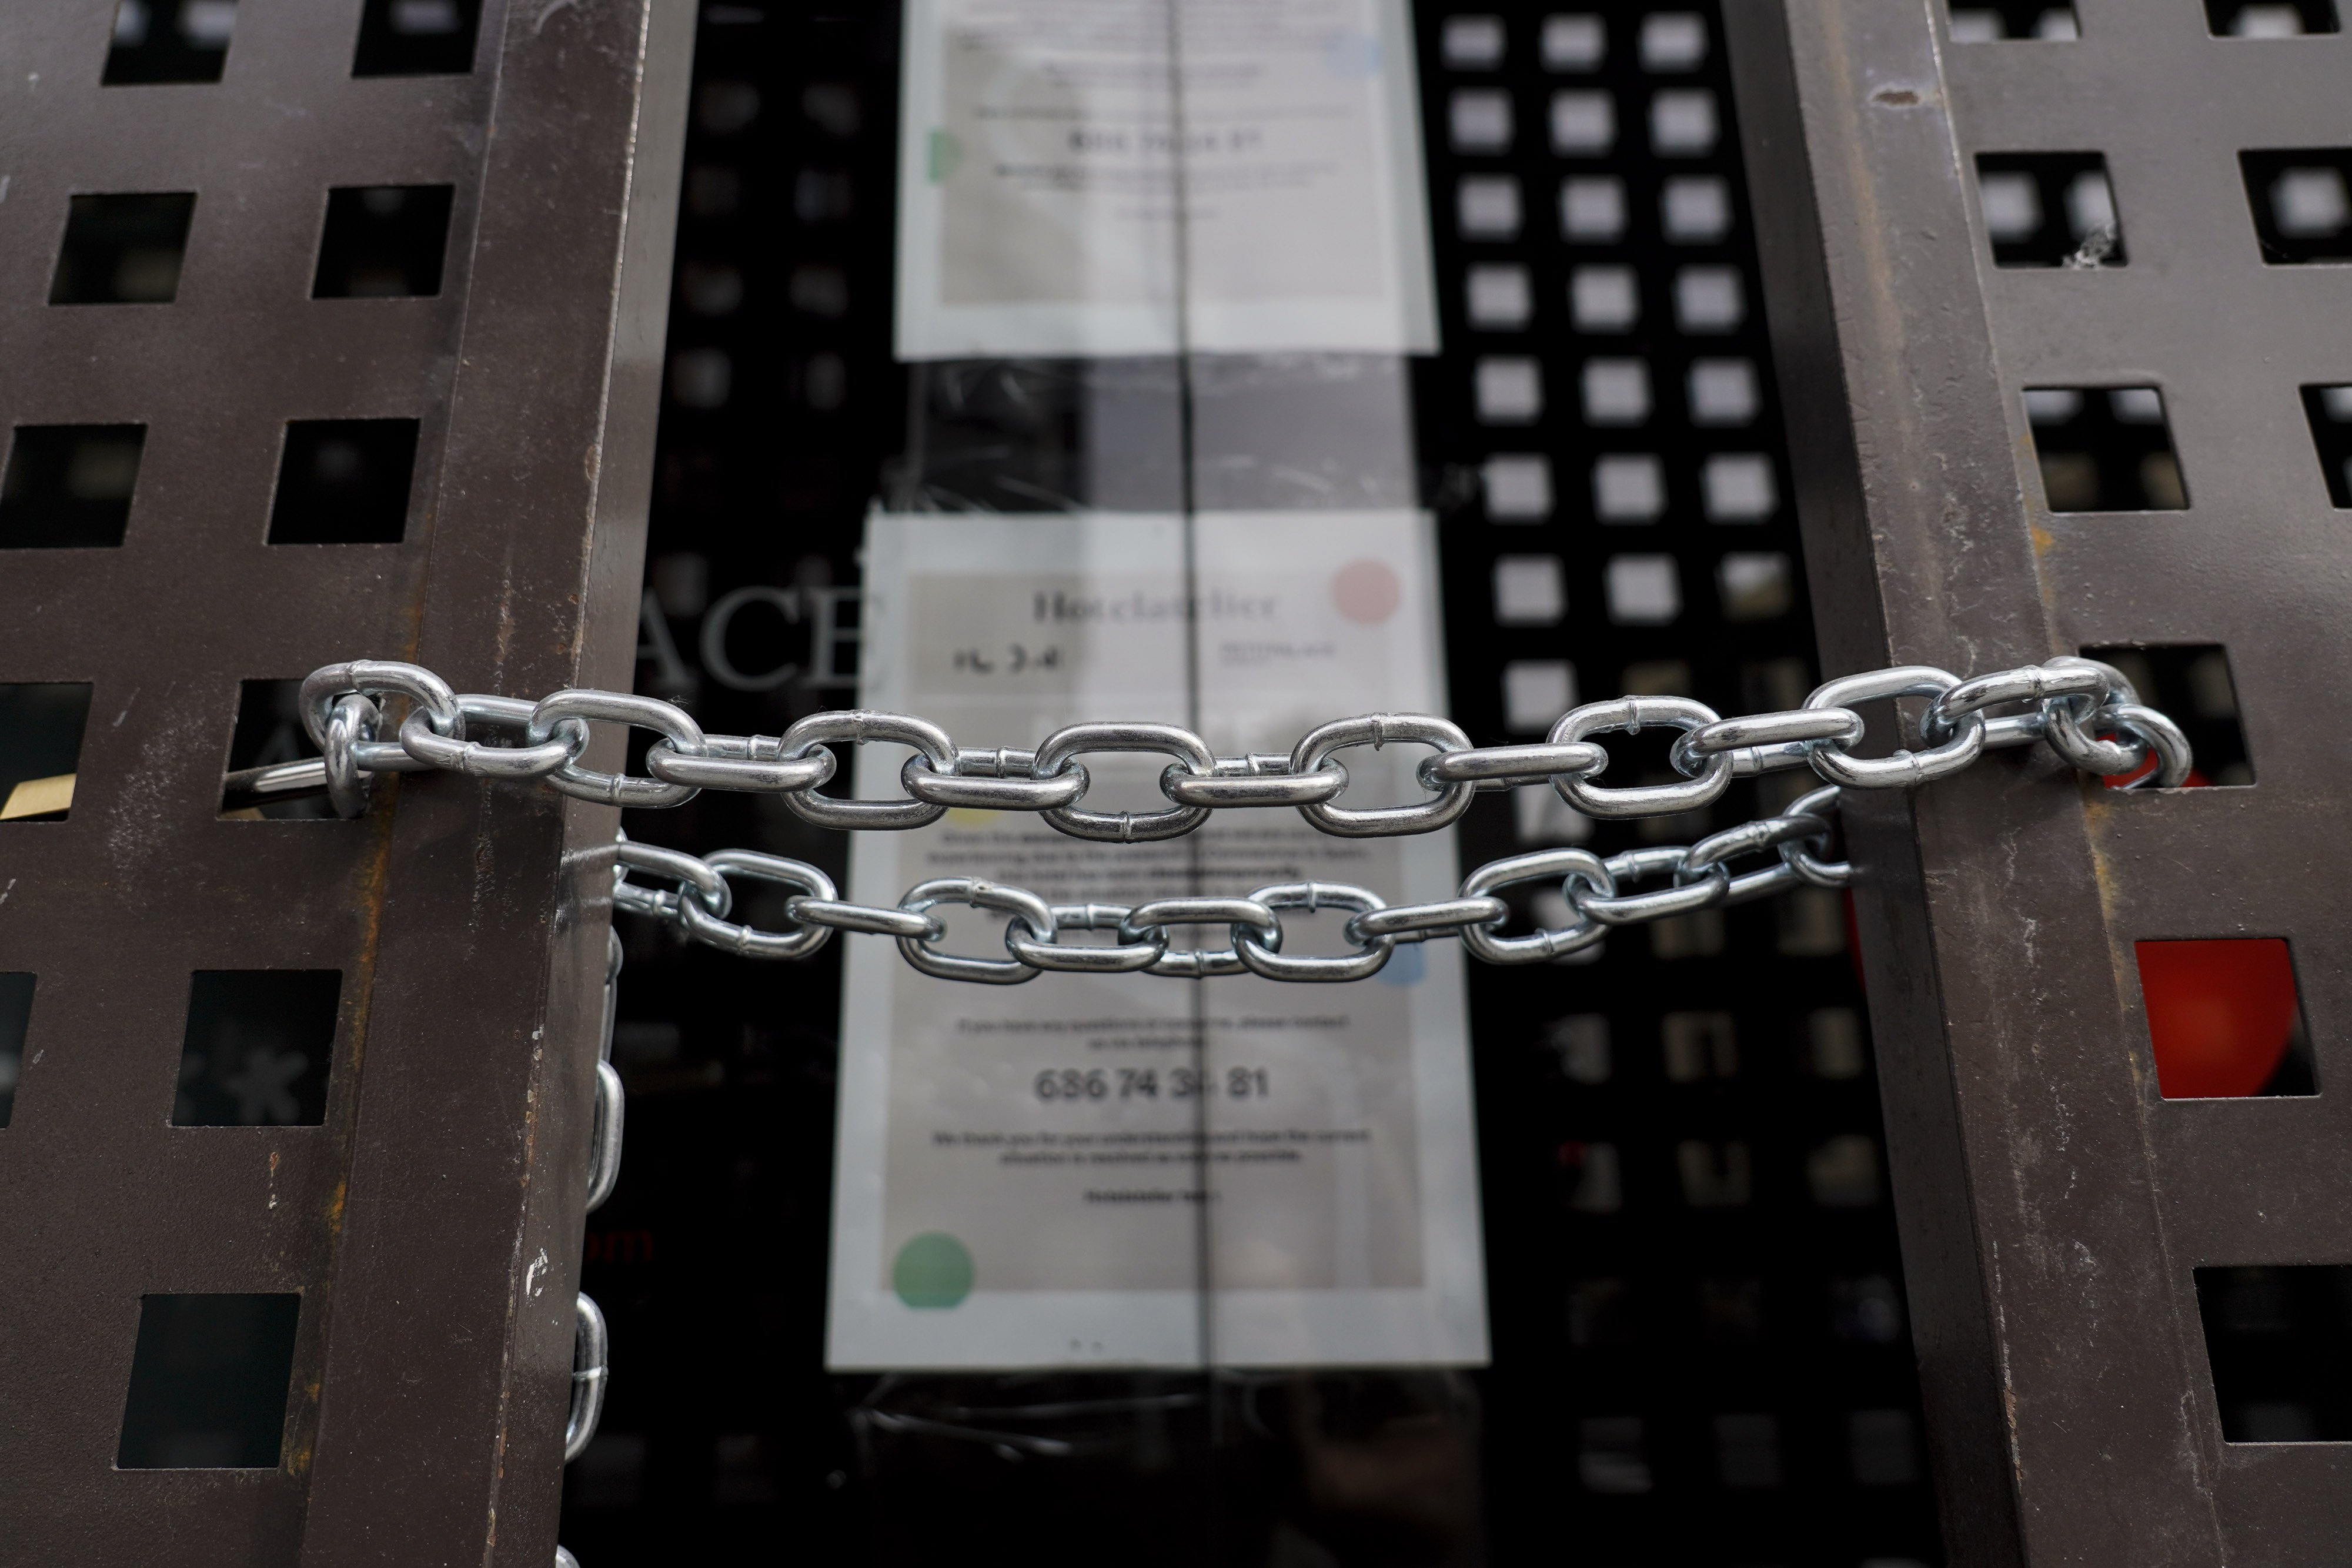 A chain secures locked gates in front of a shuttered store in Madrid.